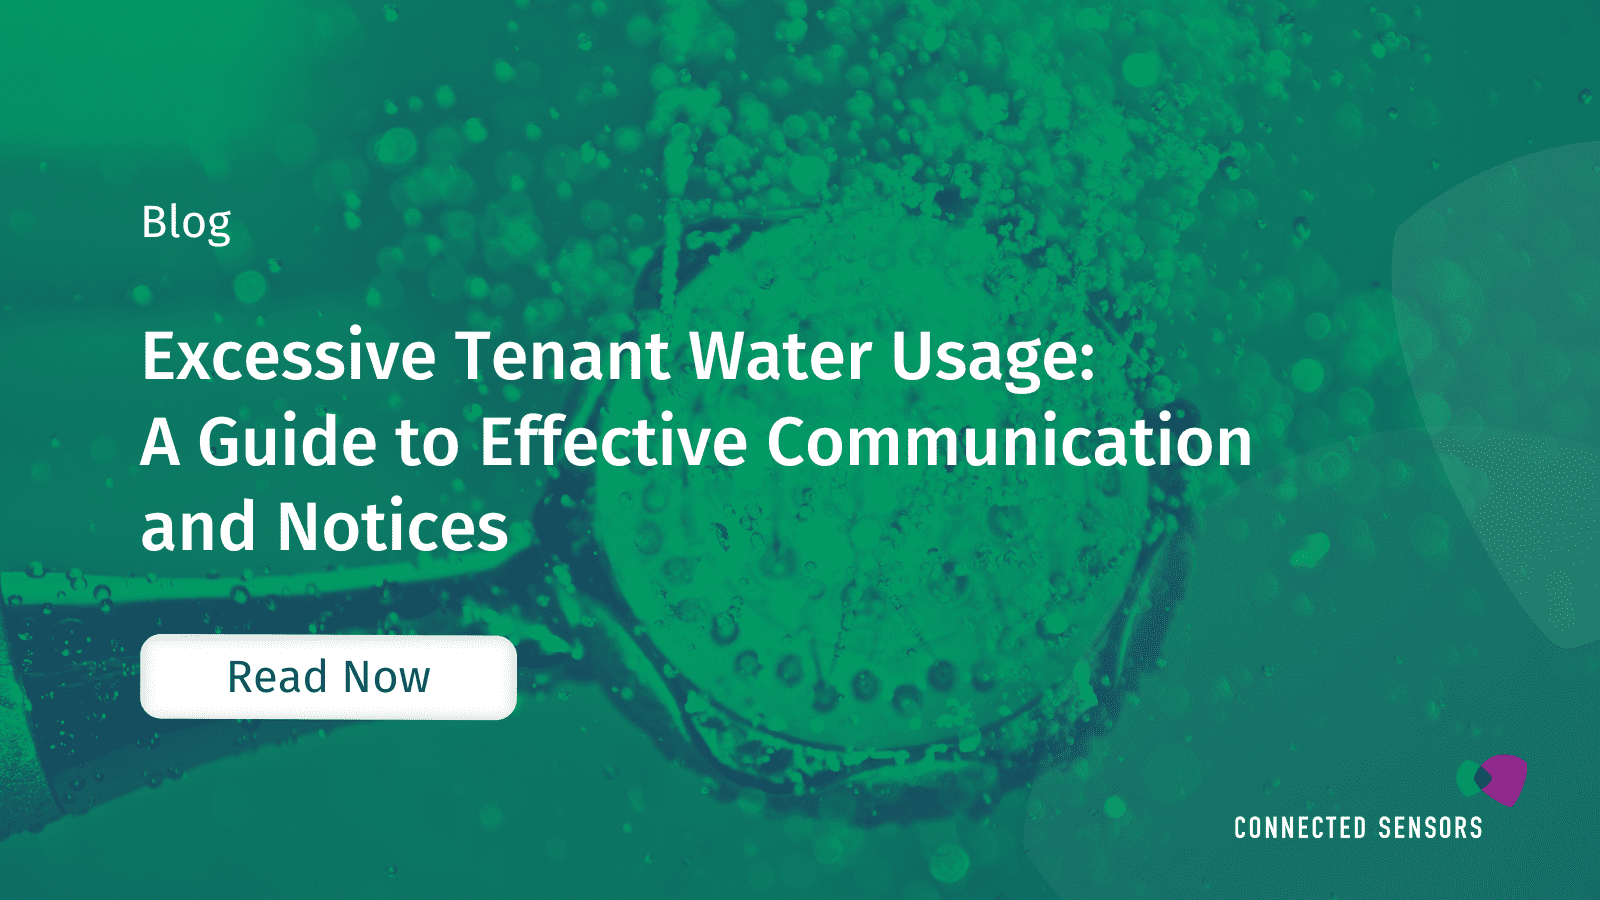 Excessive Tenant Water Usage: A Guide to Clear Communication and Effective Notices